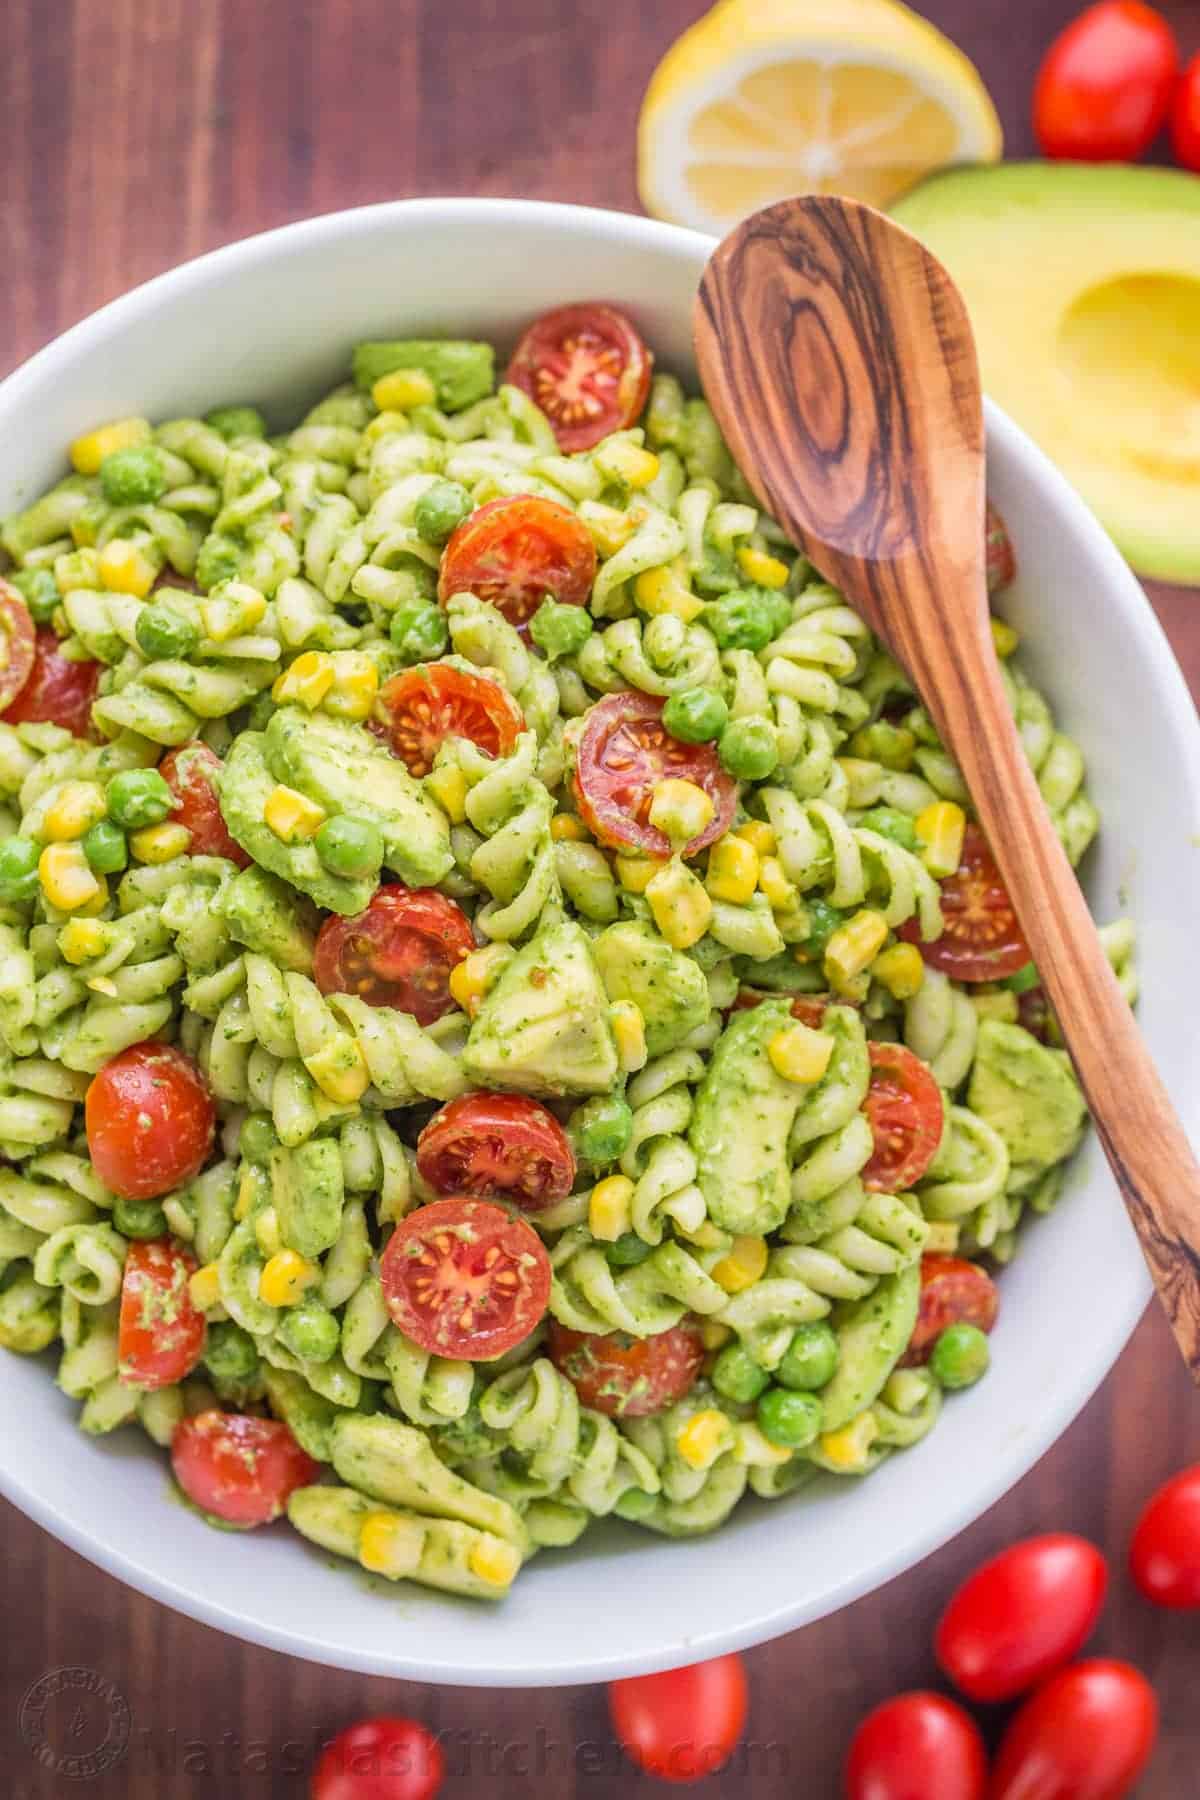 Creamy avocado pasta salad served in a large white bowl with a wooden spoon.